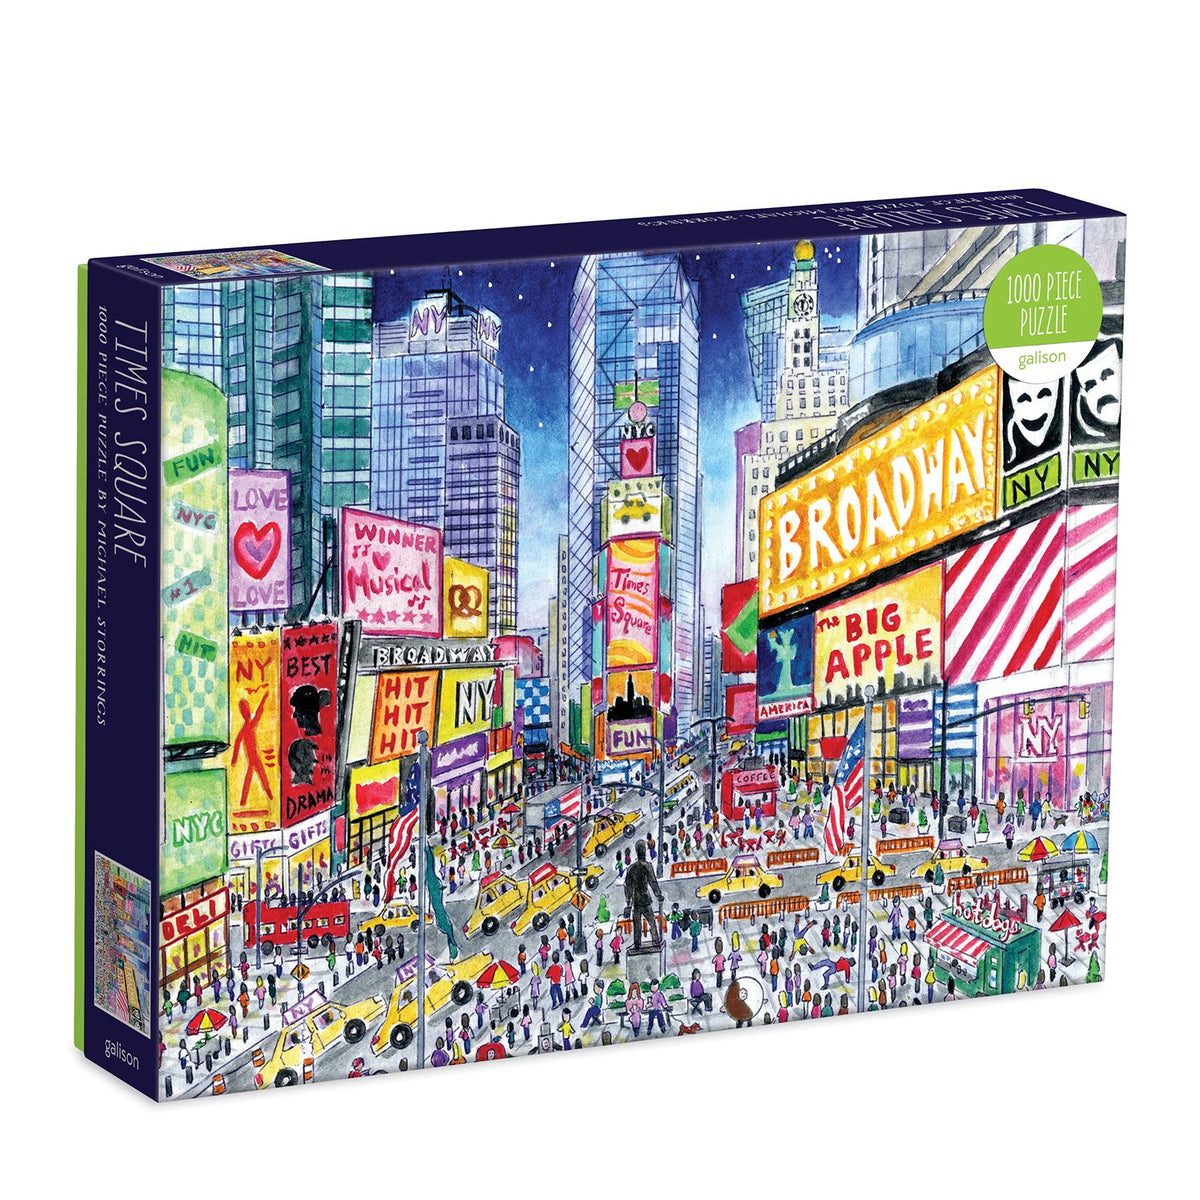 New York Jigsaw puzzle (1000 pieces)